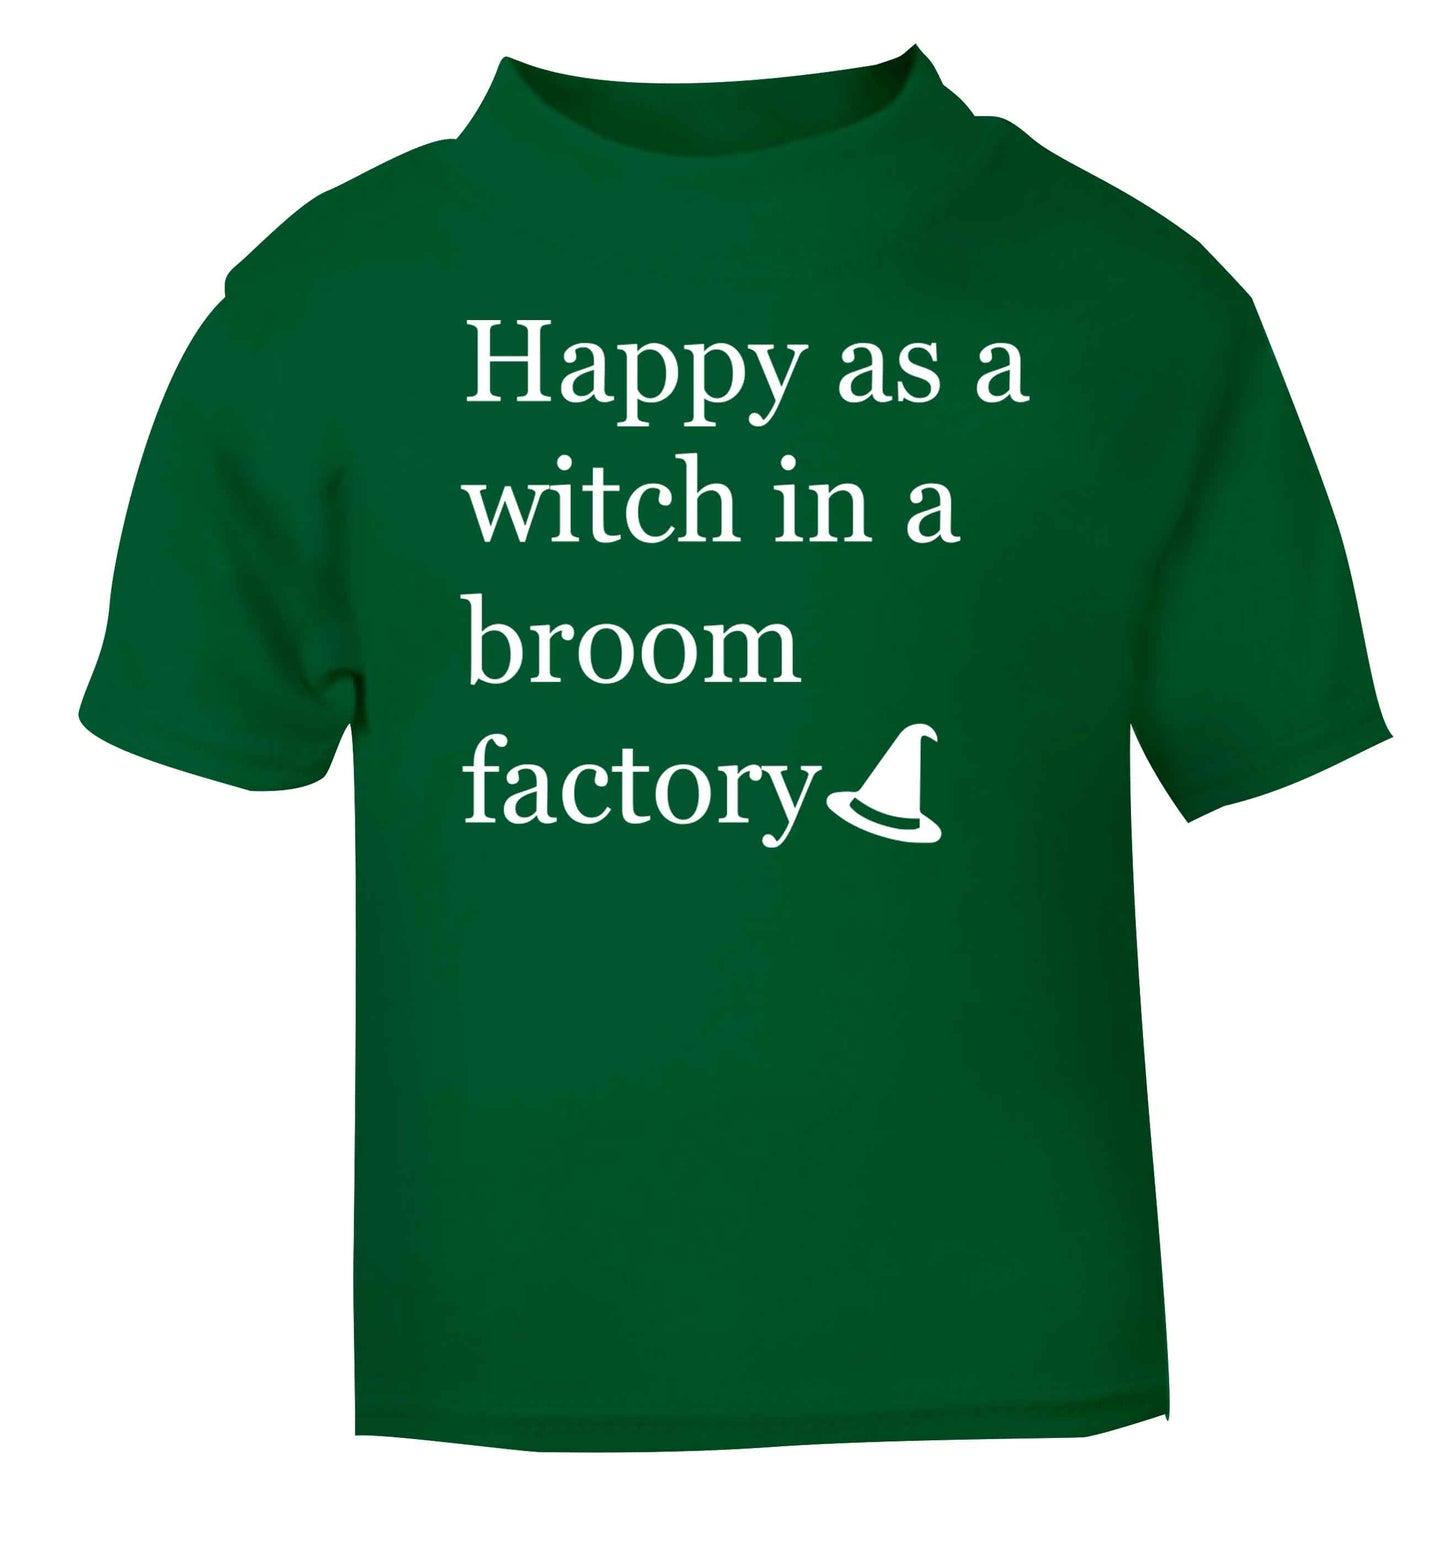 Happy as a witch in a broom factory green baby toddler Tshirt 2 Years